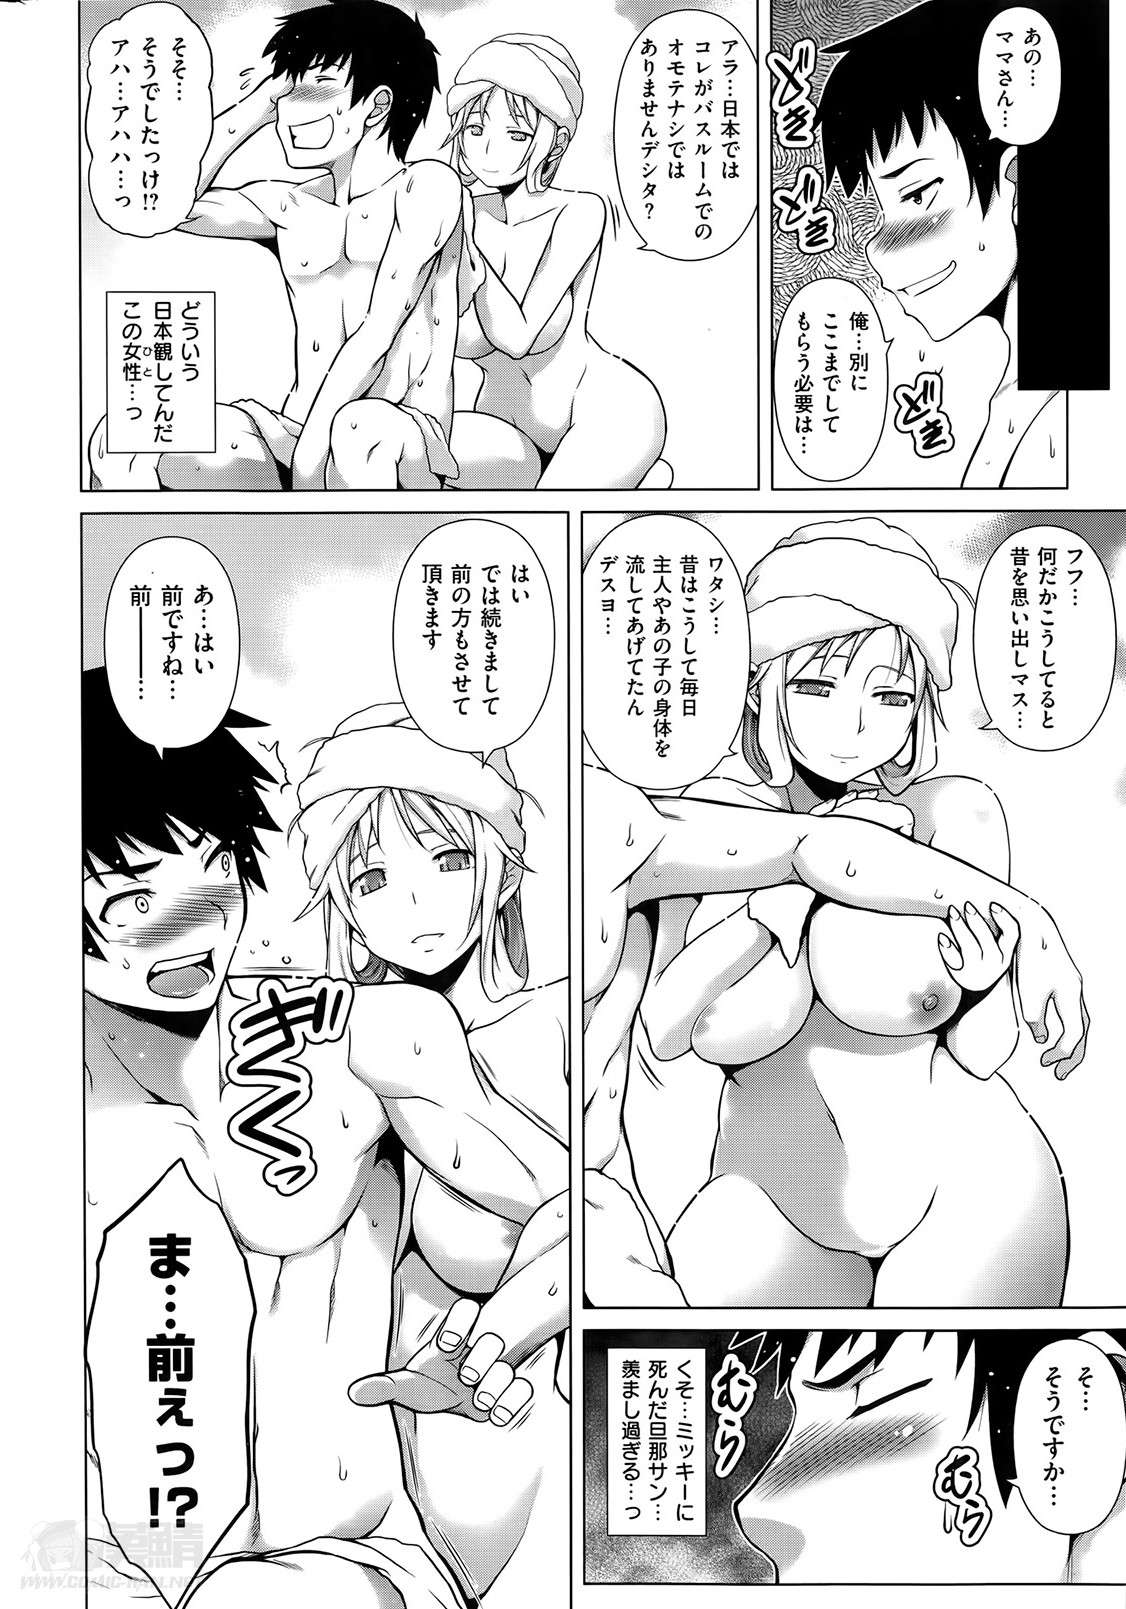 [TANABE] Ougon Taiken - Gold Experience page 4 full